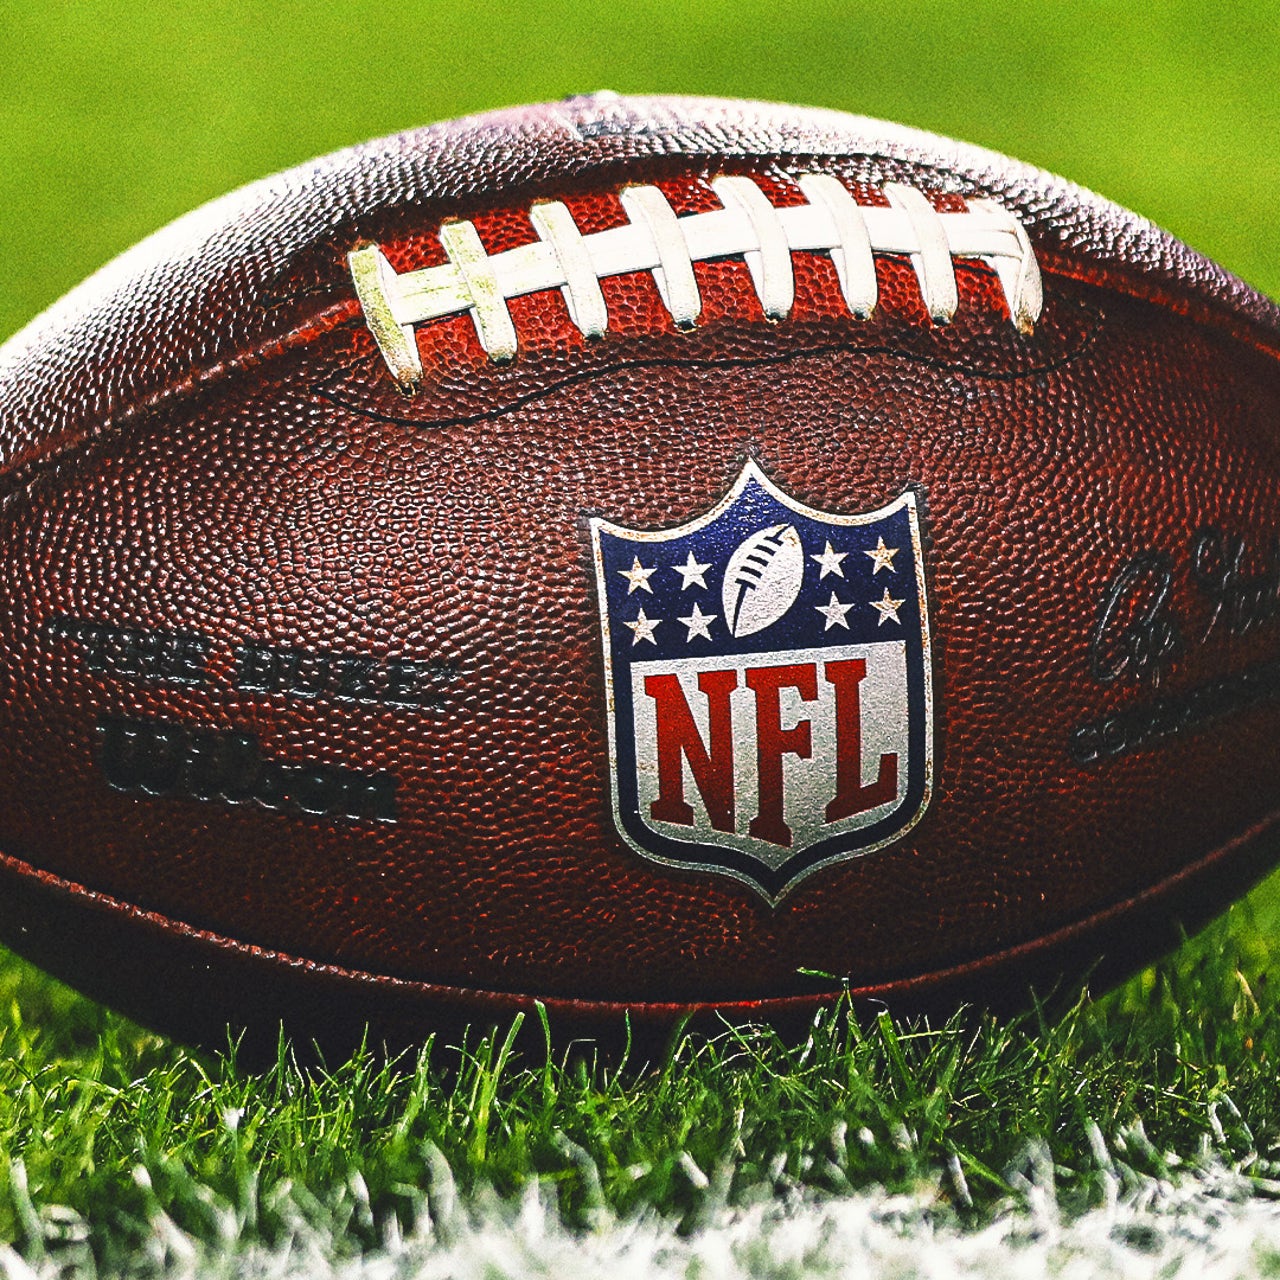 NFL tiebreaker rules: How are ties decided in division, playoff